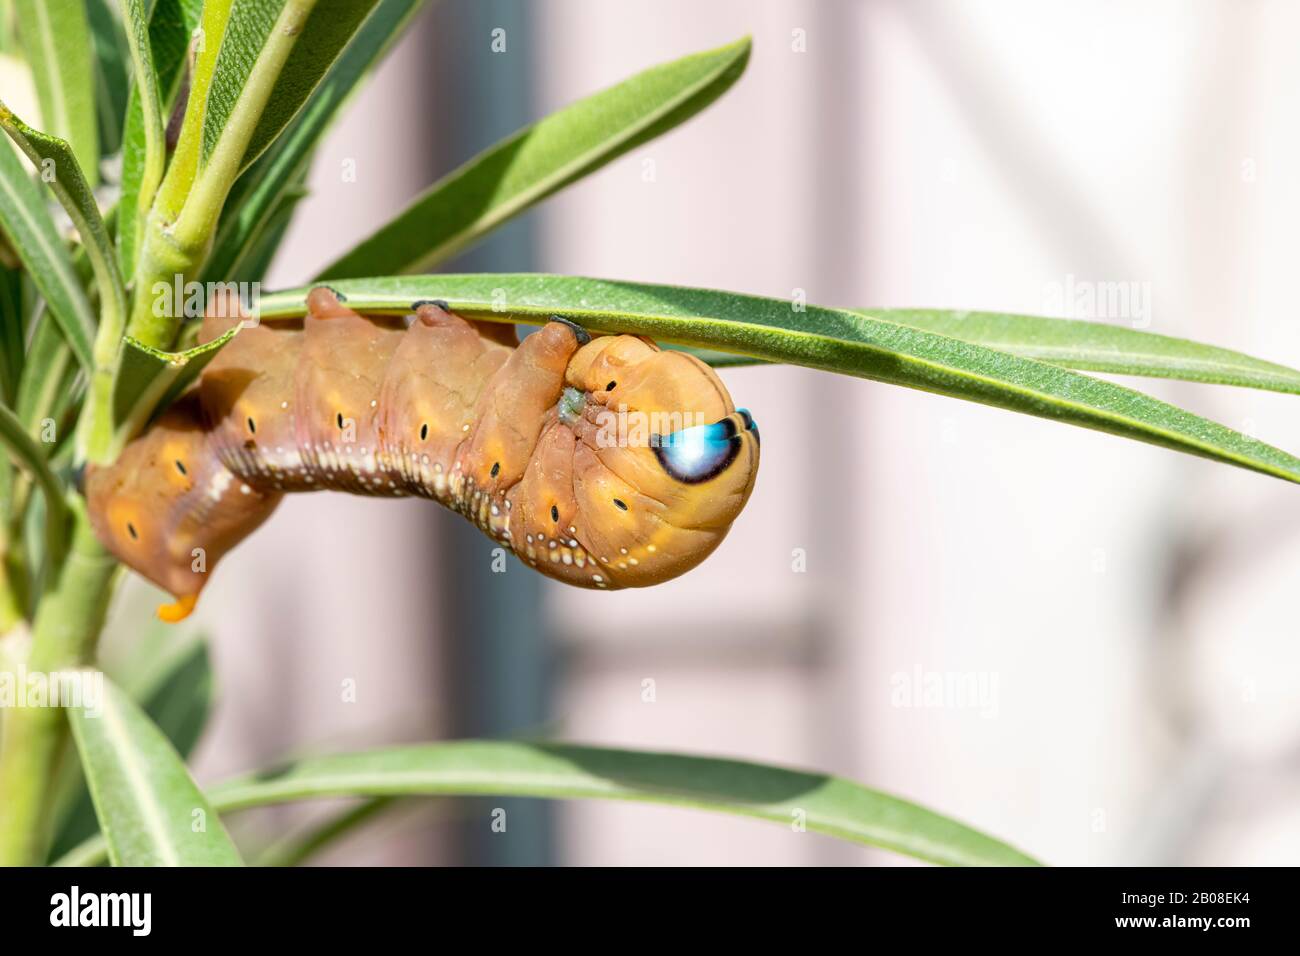 Caterpillar of the Daphnis nerii or the Oleander Hawk-moth Stock Photo